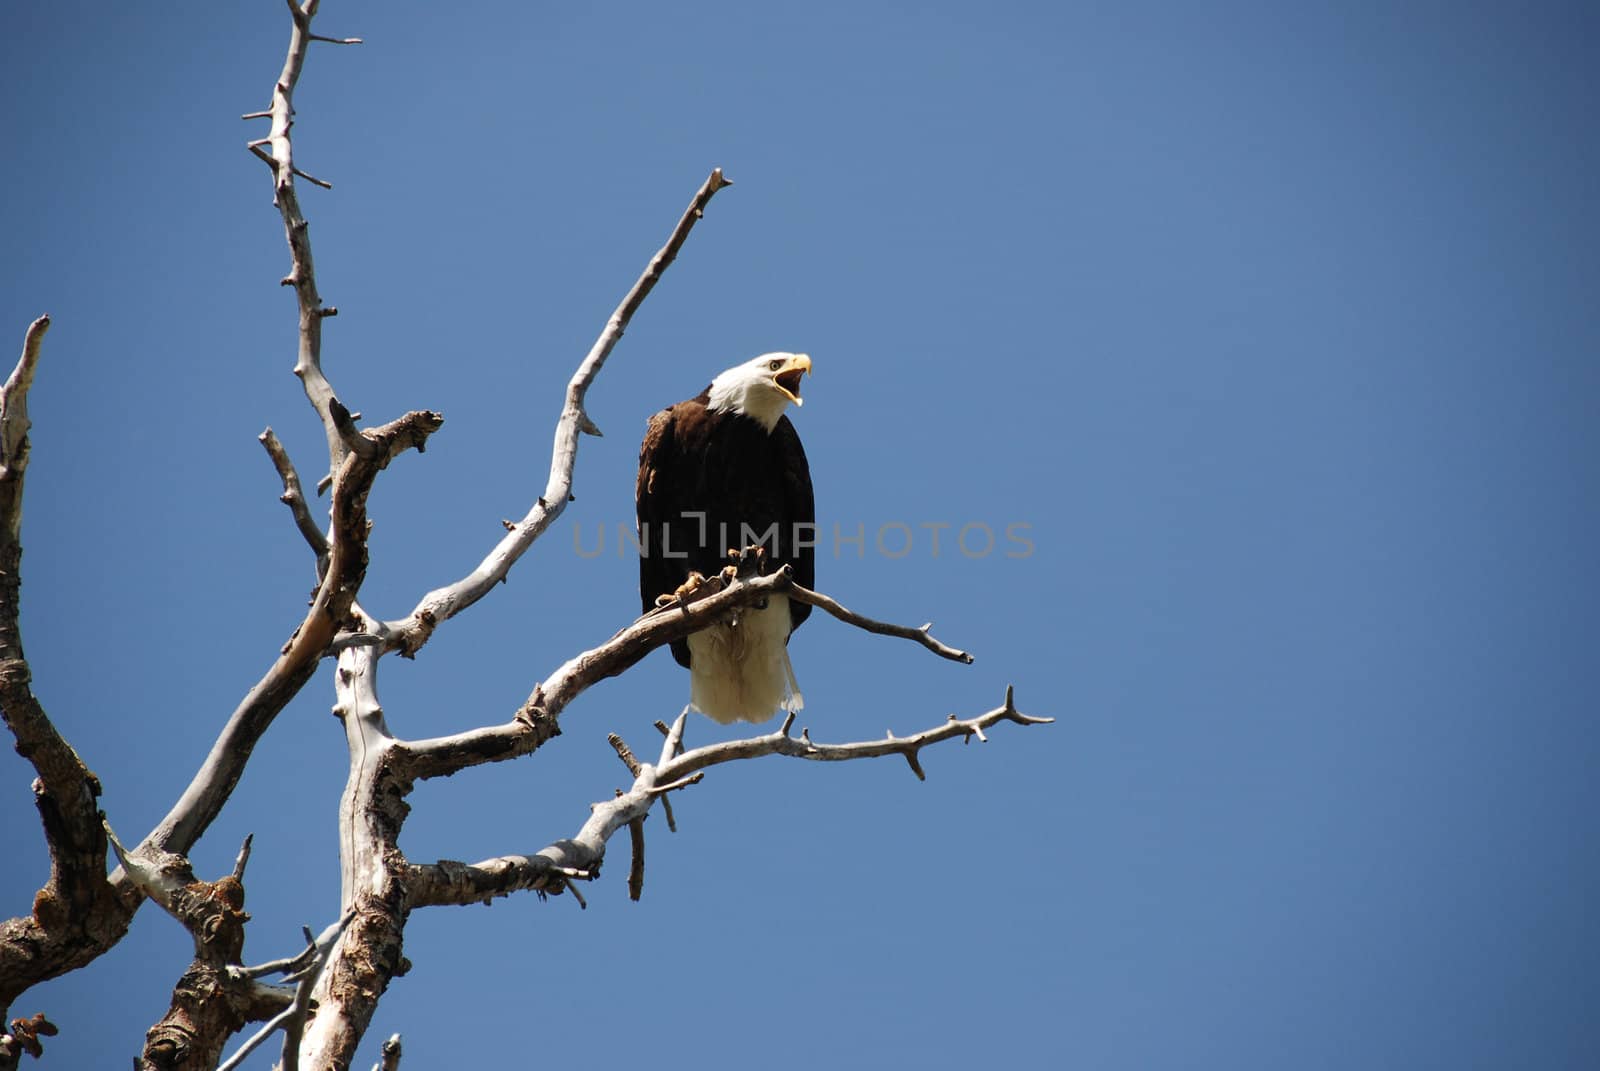 bald eagle is flying agains the blue sky